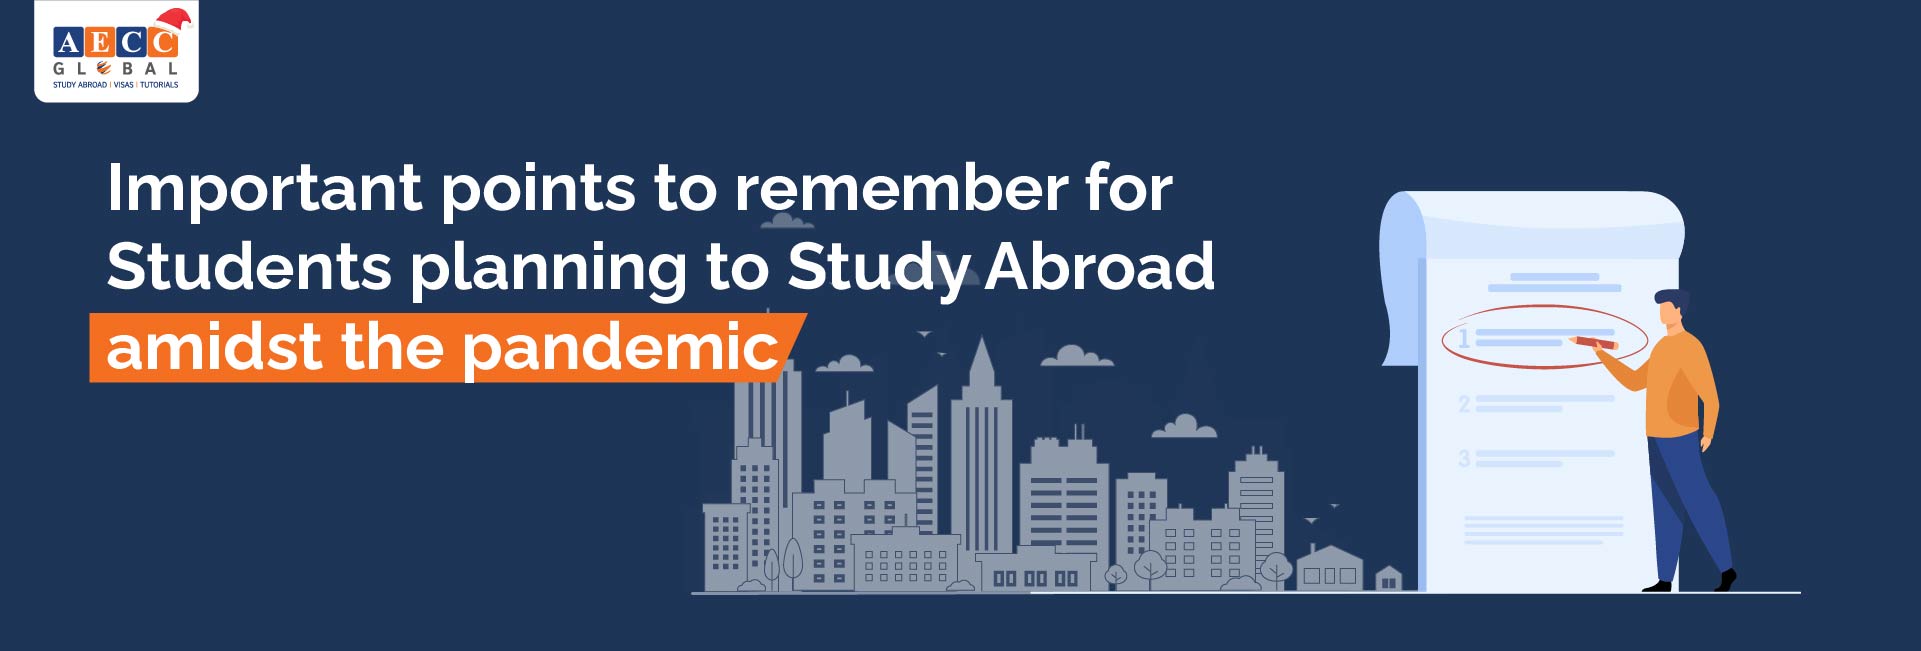 Important points to remember for Students planning to Study Abroad amidst the pandemic